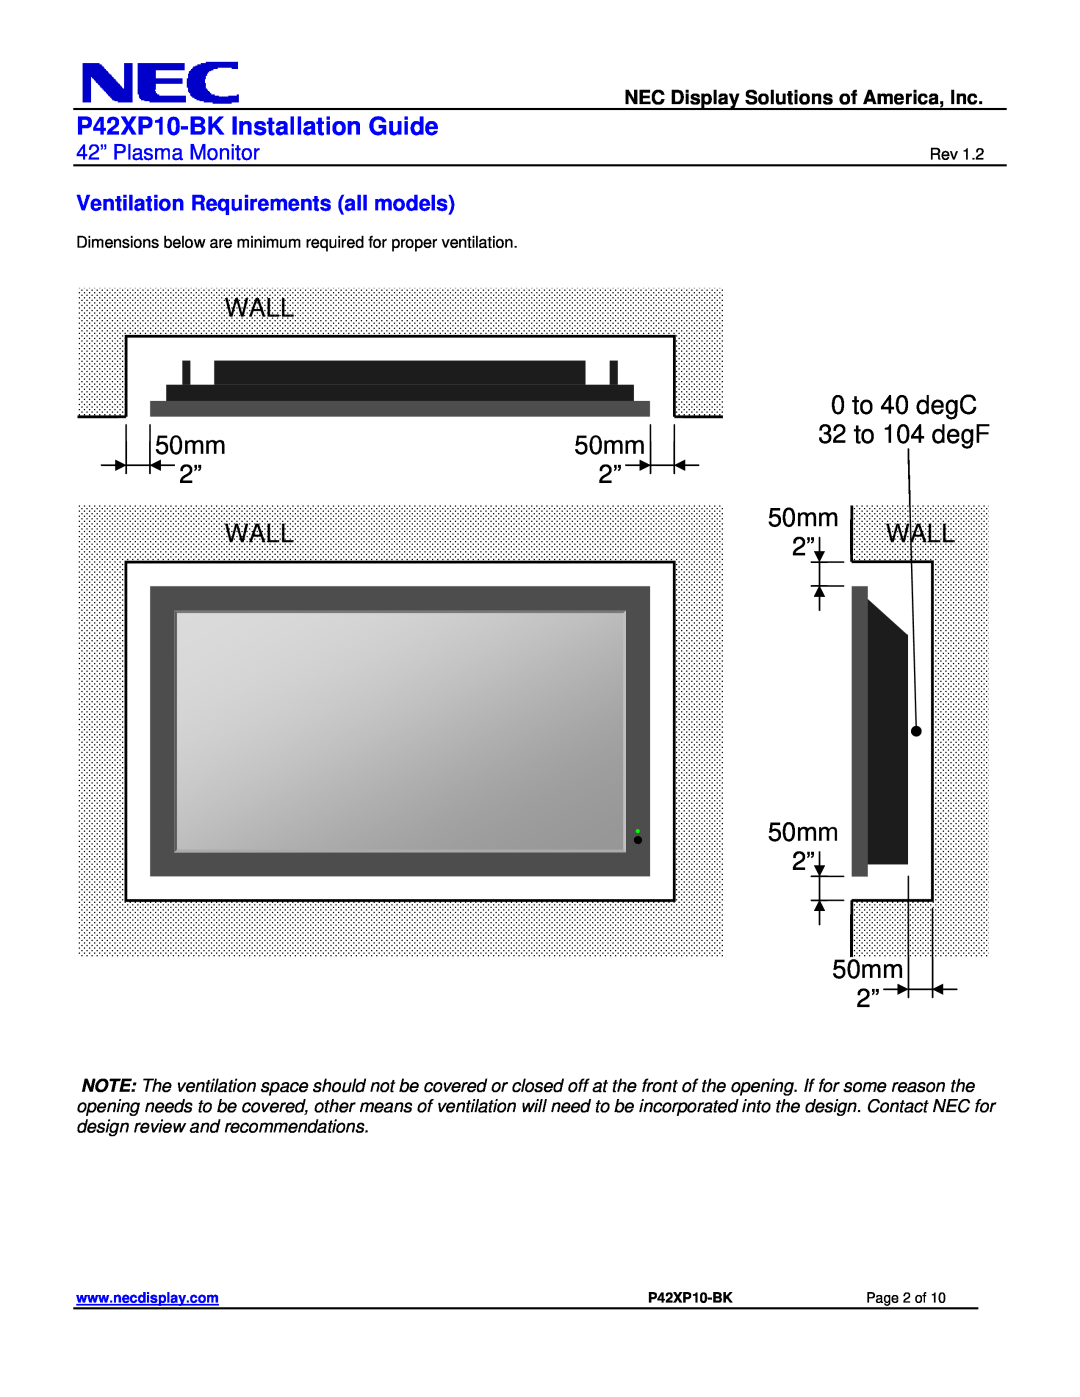 NEC P42XP10-BK Installation Guide, WALL 50mm 2” WALL, 0 to 40 degC 50mm32 to 104 degF 2” 50mm 2” WALL 50mm 2” 50mm 2” 